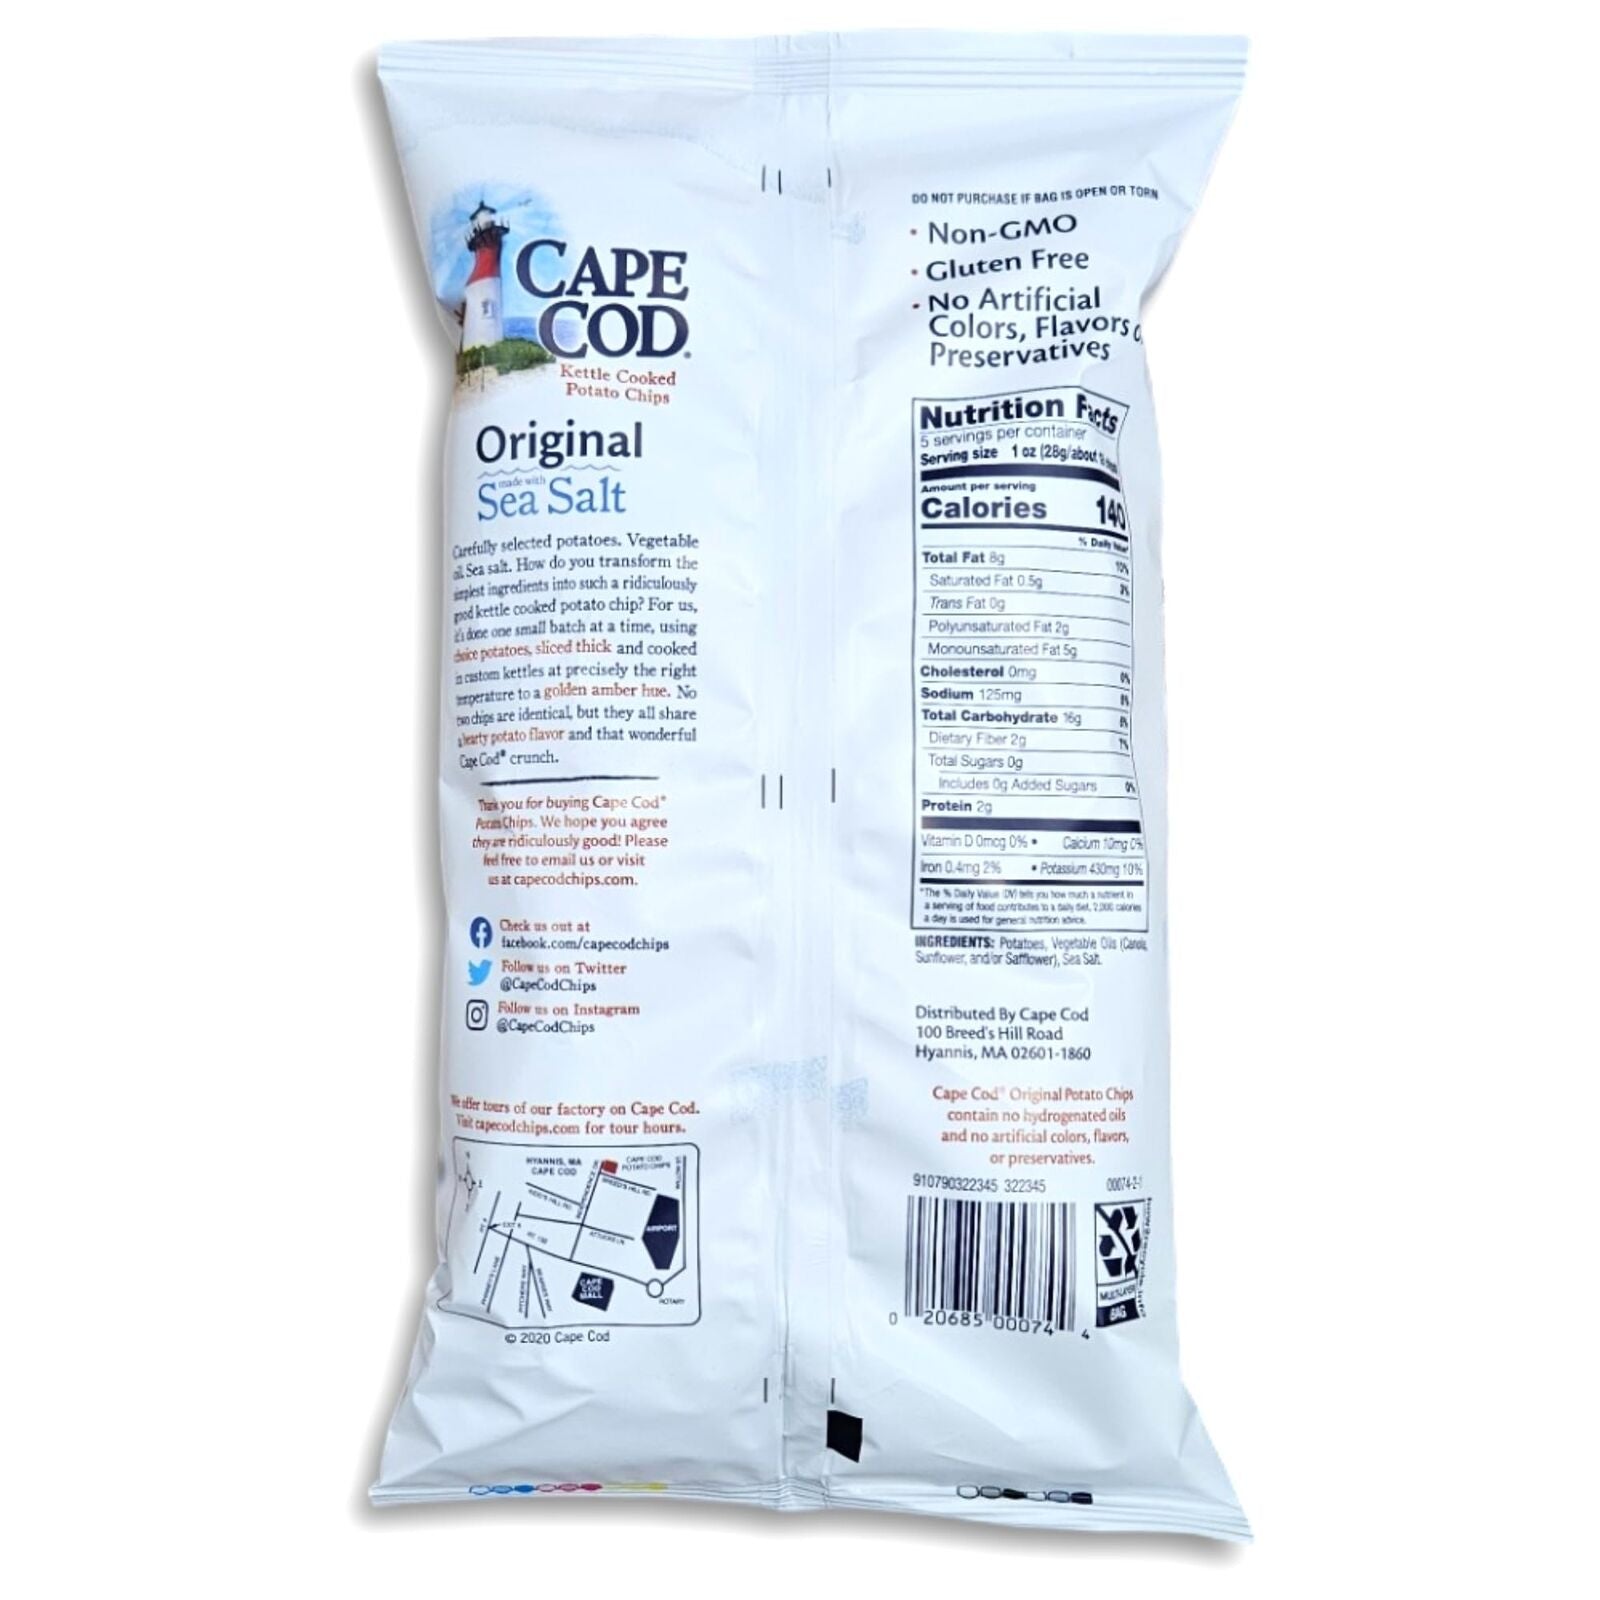 Cape Cod Kettle Cooked Potato Chips Value Pack | Bundled by Tribeca Curations |